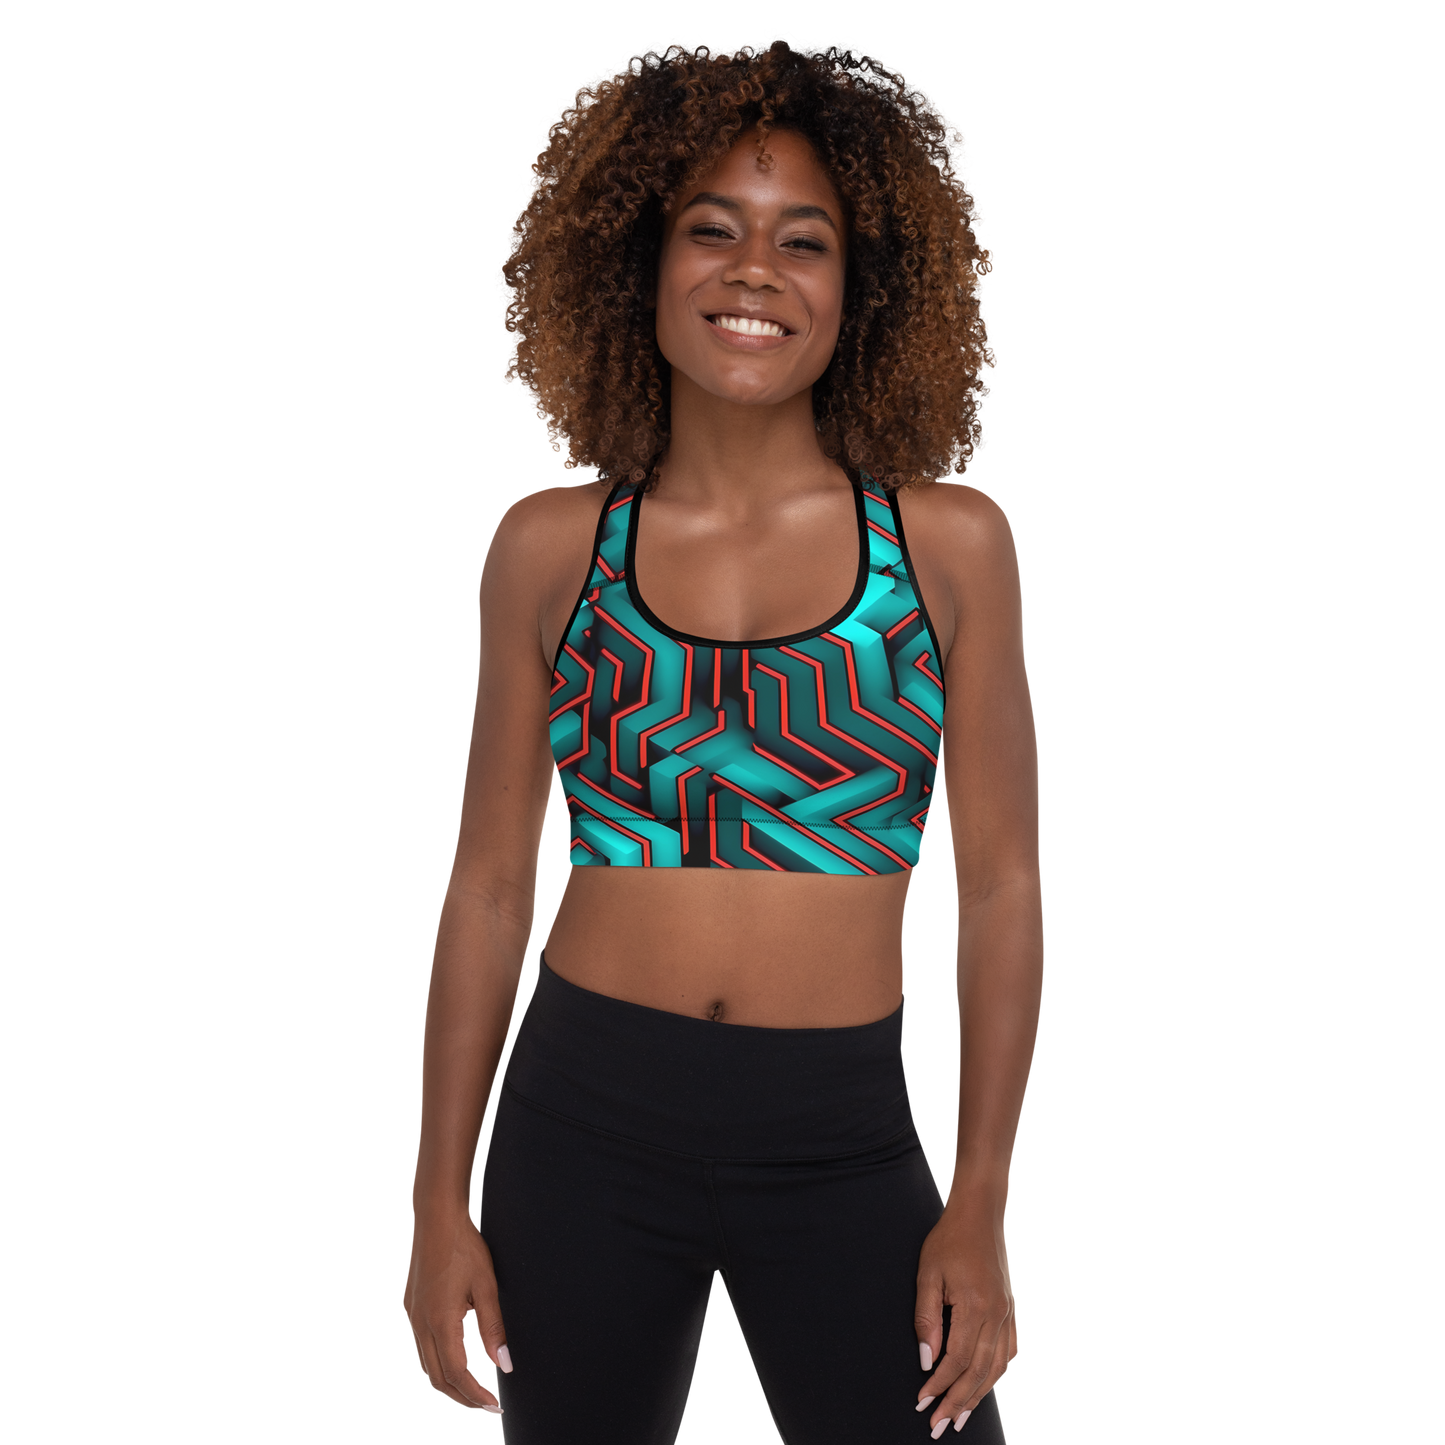 3D Maze Illusion | 3D Patterns | All-Over Print Padded Sports Bra - #2